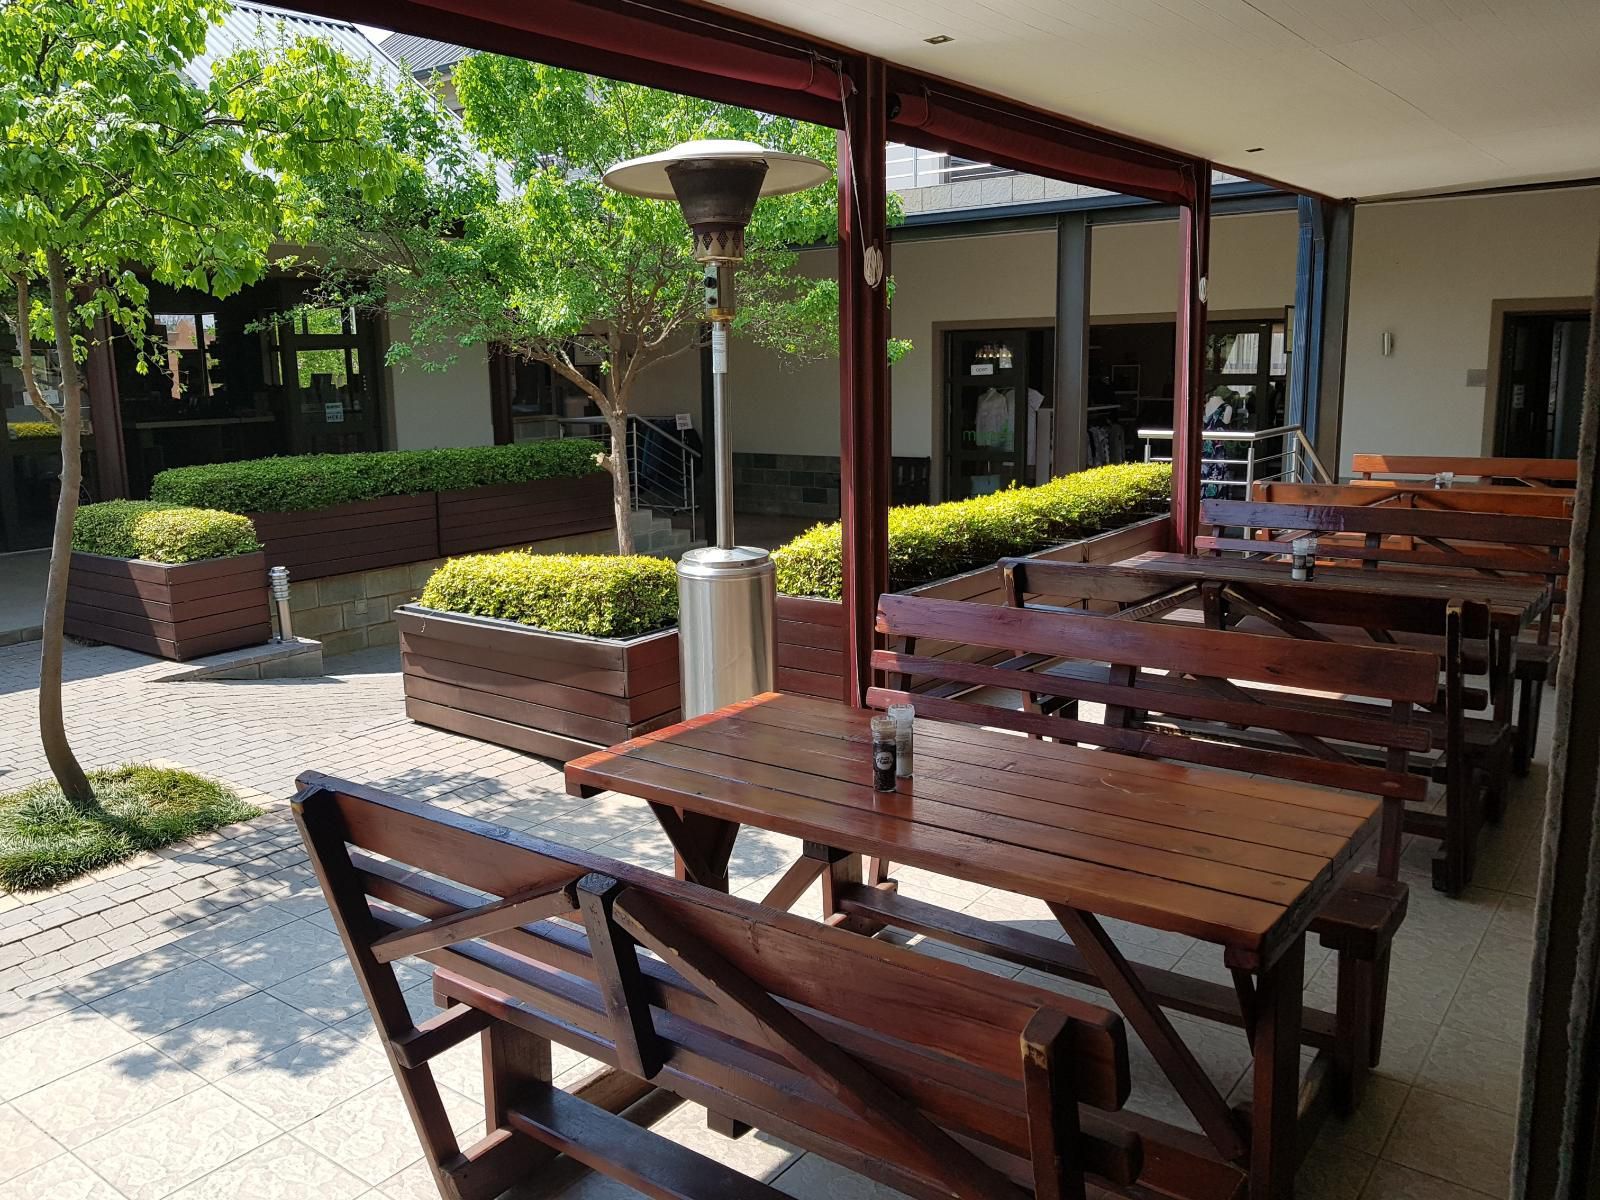 Stay 67 Apartments Dullstroom Dullstroom Mpumalanga South Africa 